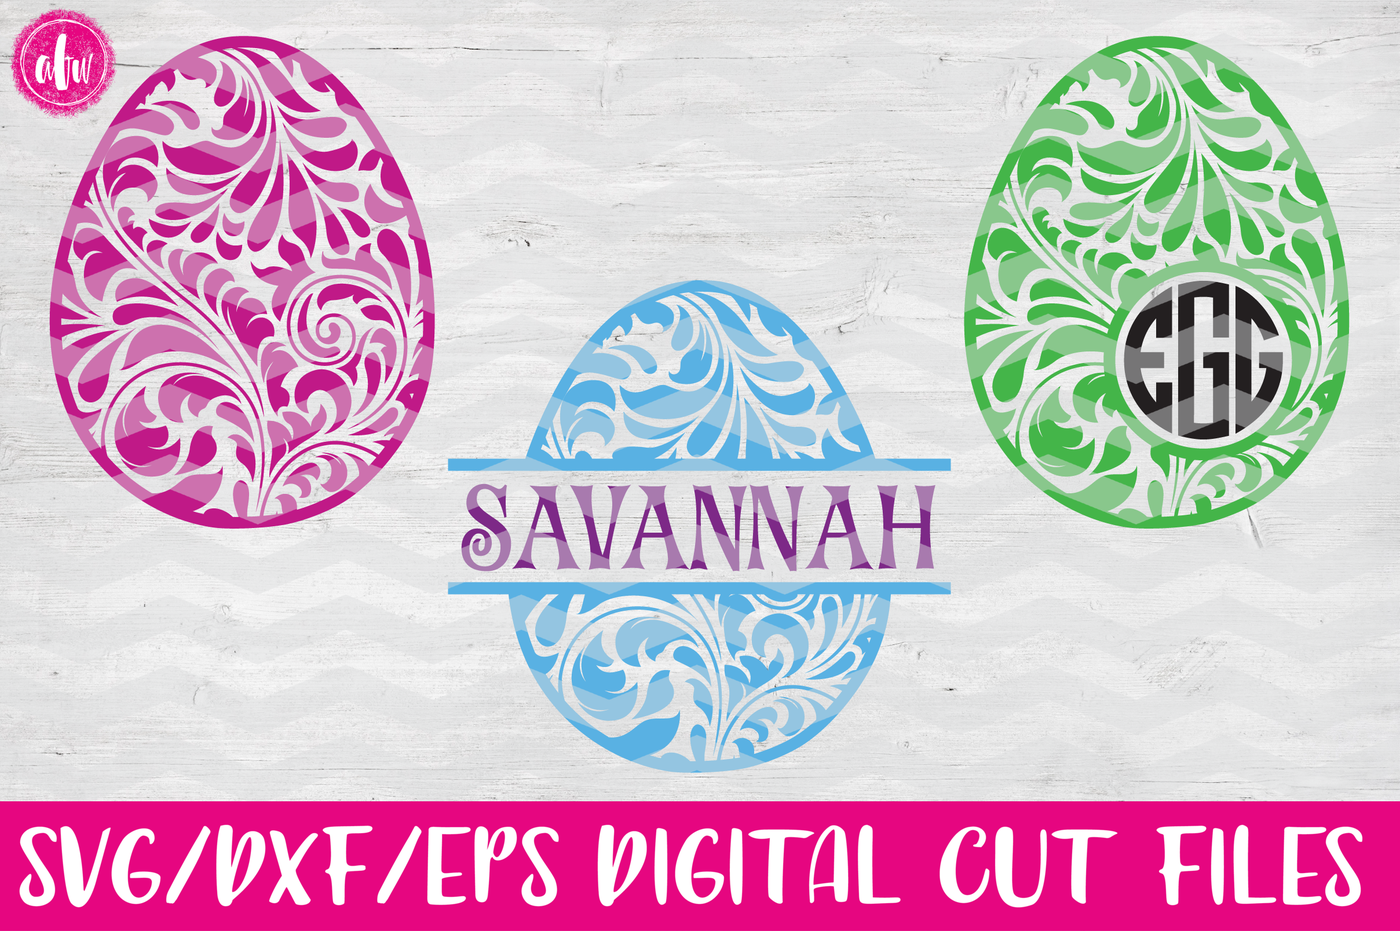 Download Flourish Patterned Easter Eggs - SVG, DXF, EPS Cut Files By AFW Designs | TheHungryJPEG.com